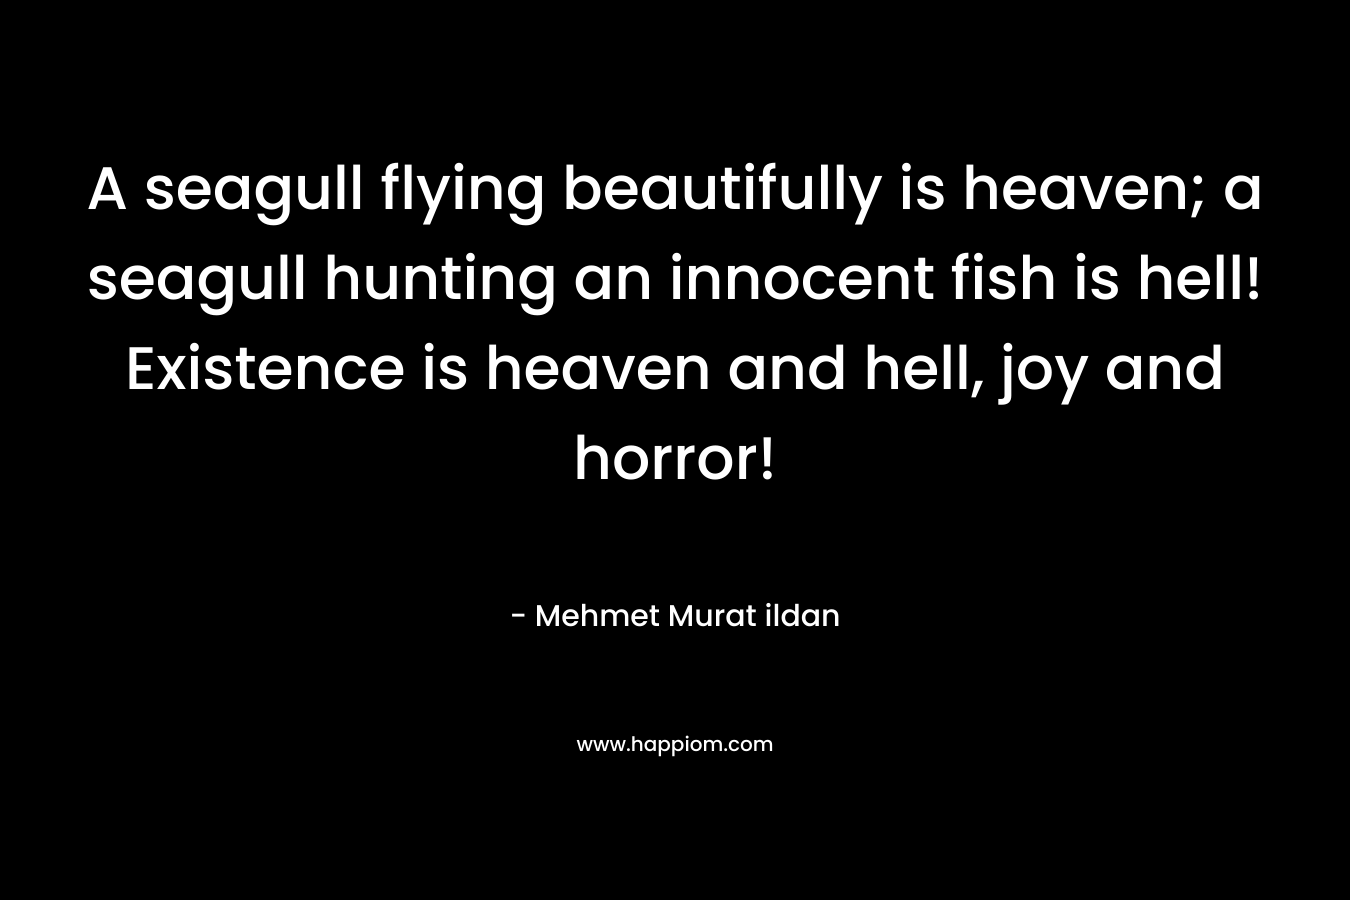 A seagull flying beautifully is heaven; a seagull hunting an innocent fish is hell! Existence is heaven and hell, joy and horror! – Mehmet Murat ildan